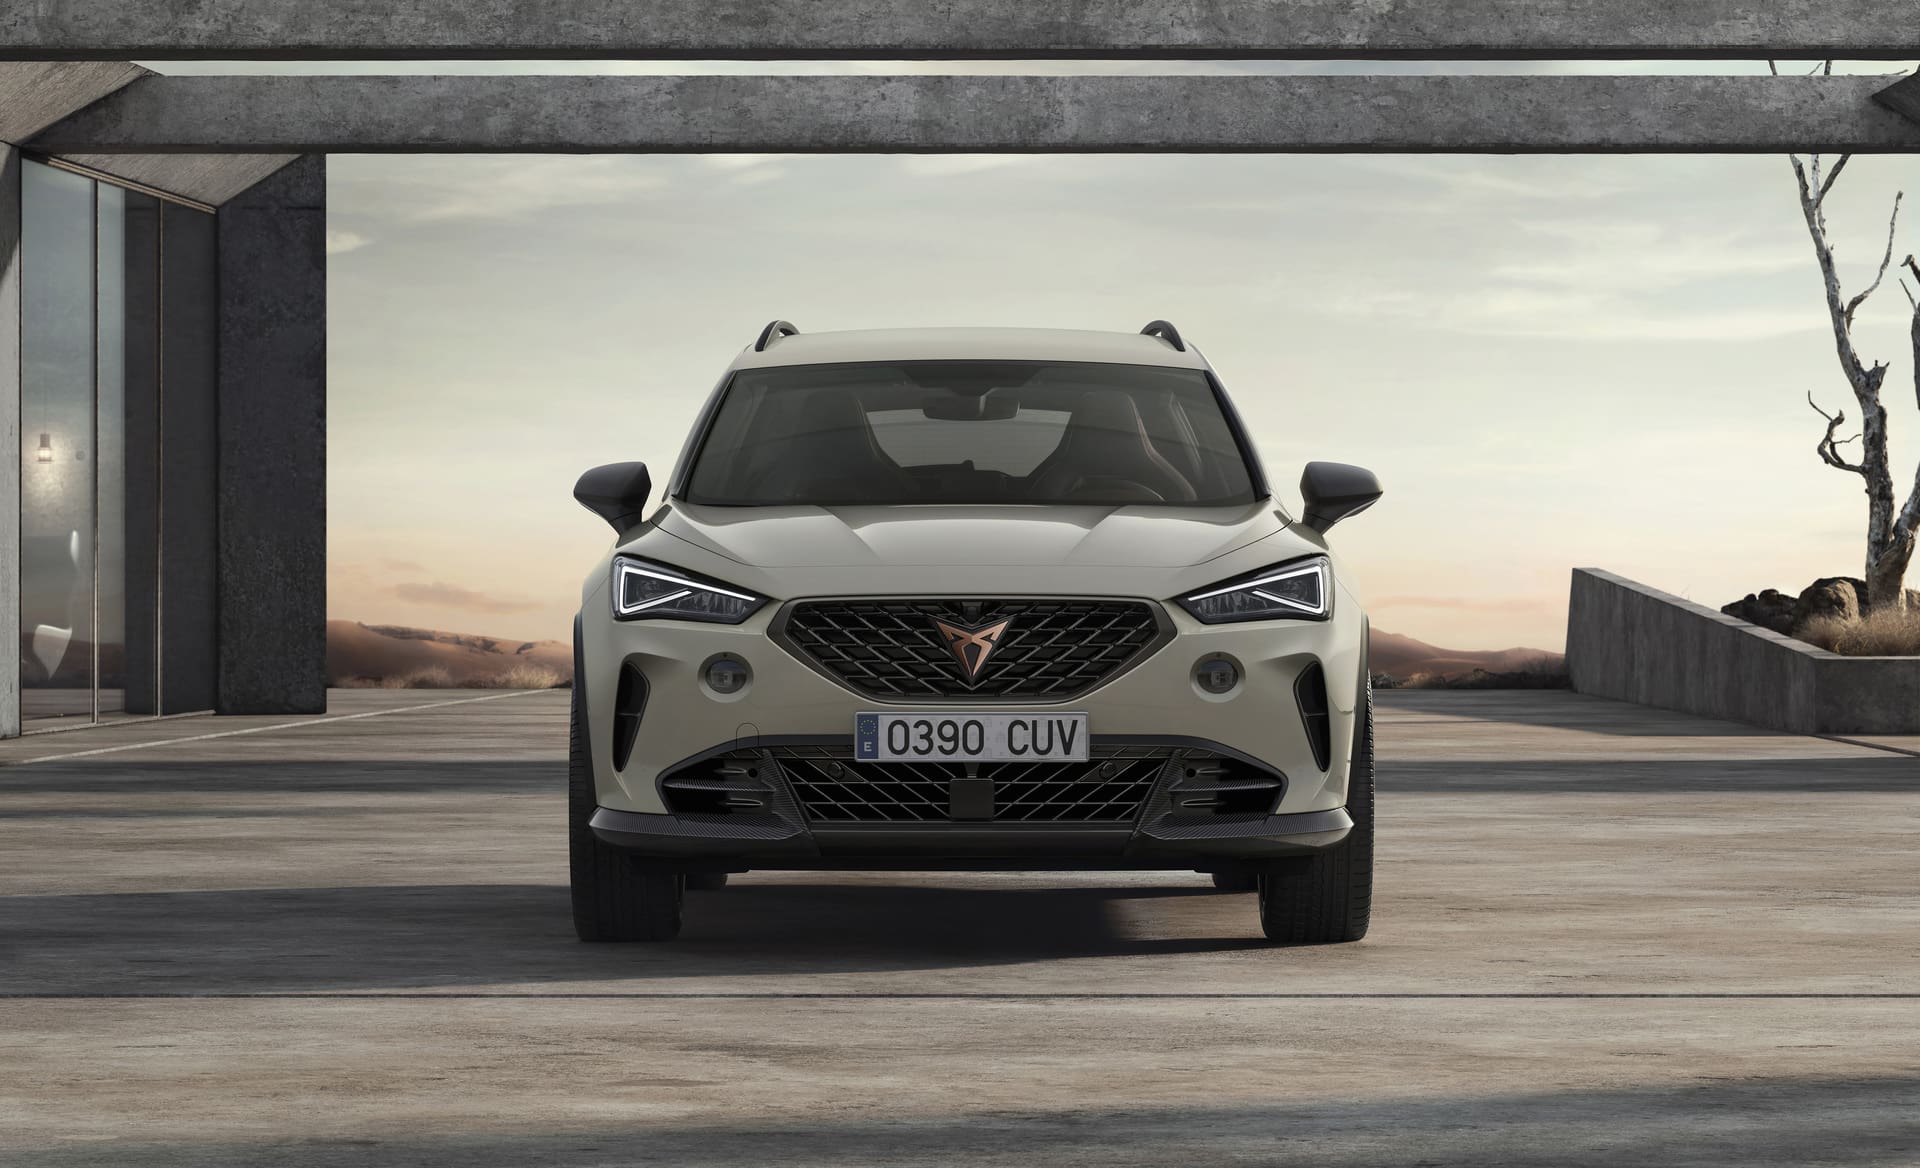 Cupra wants to awaken desires with the Formentor VZ5 and, above all, win new customers in Switzerland.